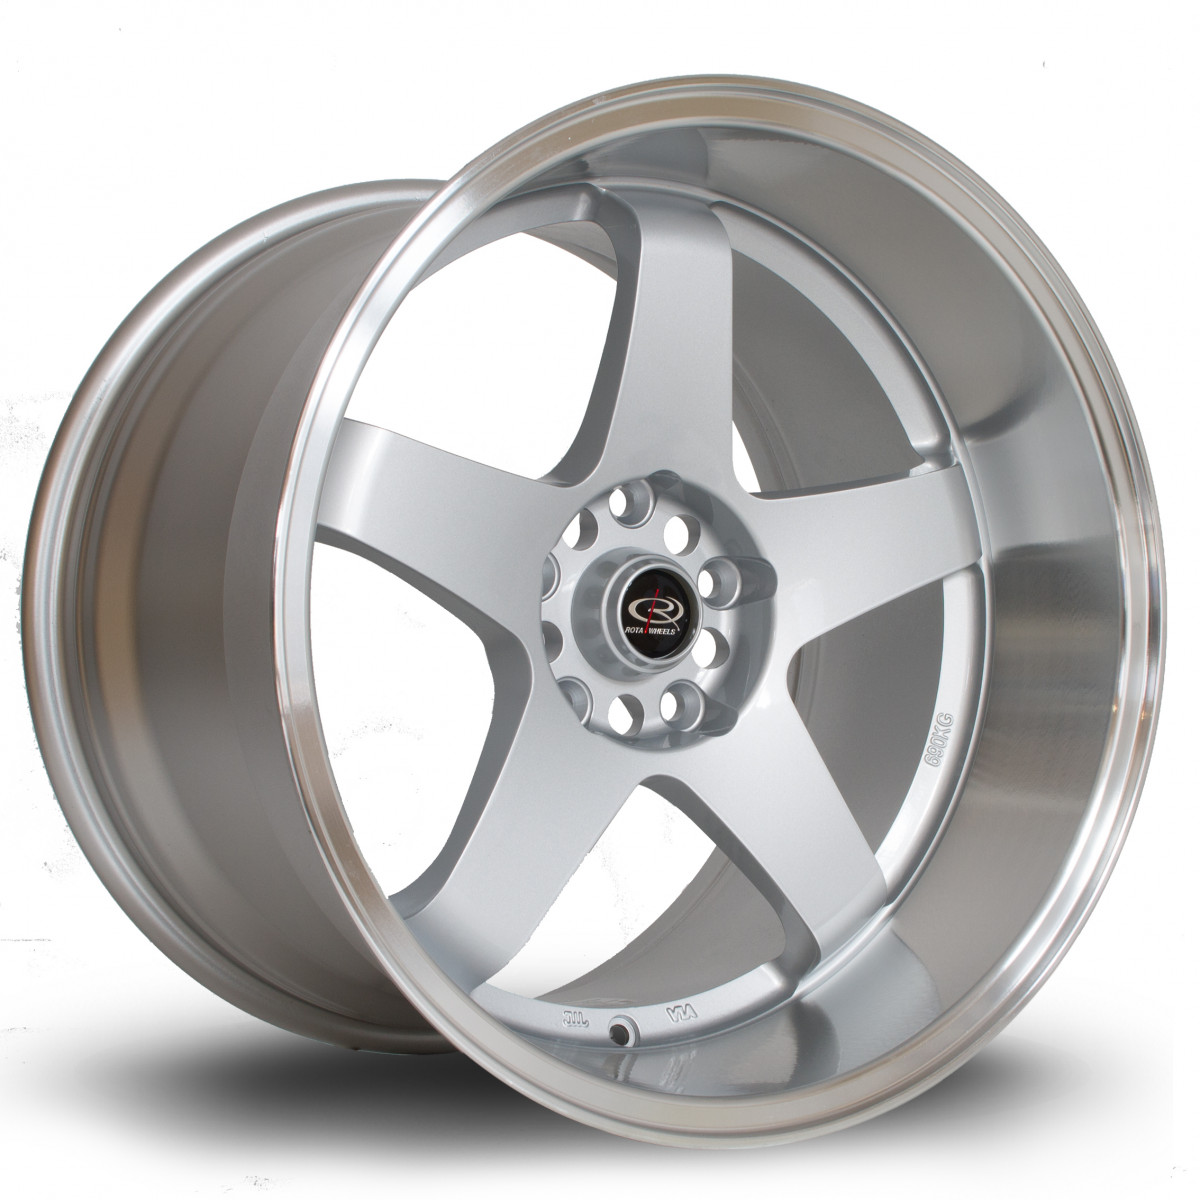 GTR-D 18x12 5x114 ET0 Silver with Polished Lip